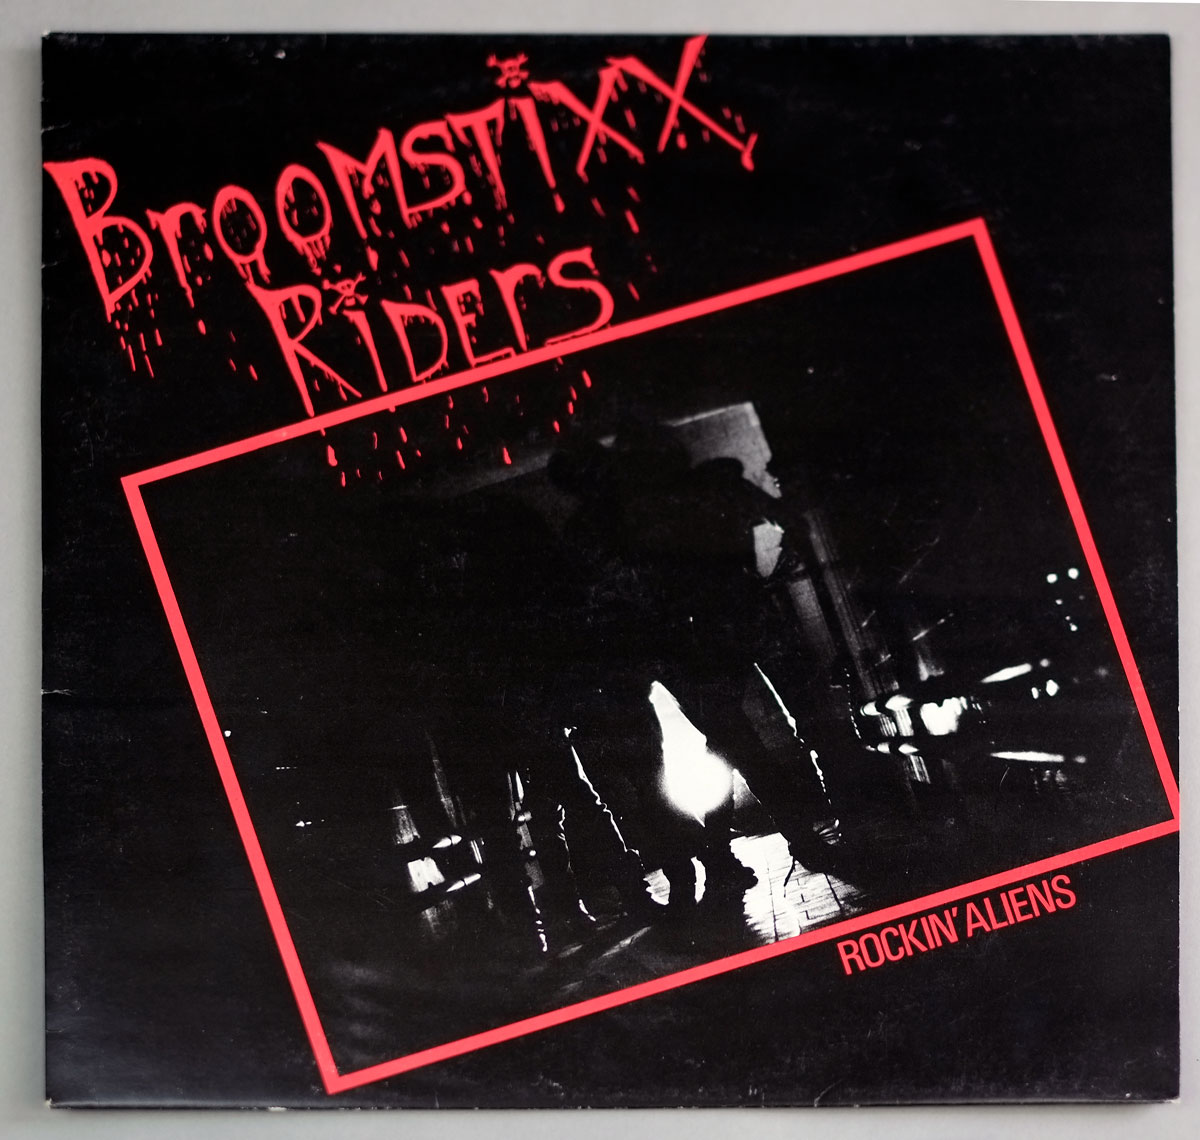 High Resolution Photo Album Front Cover of BROOMSTIXX RIDERS - Rockin' Aliens https://vinyl-records.nl